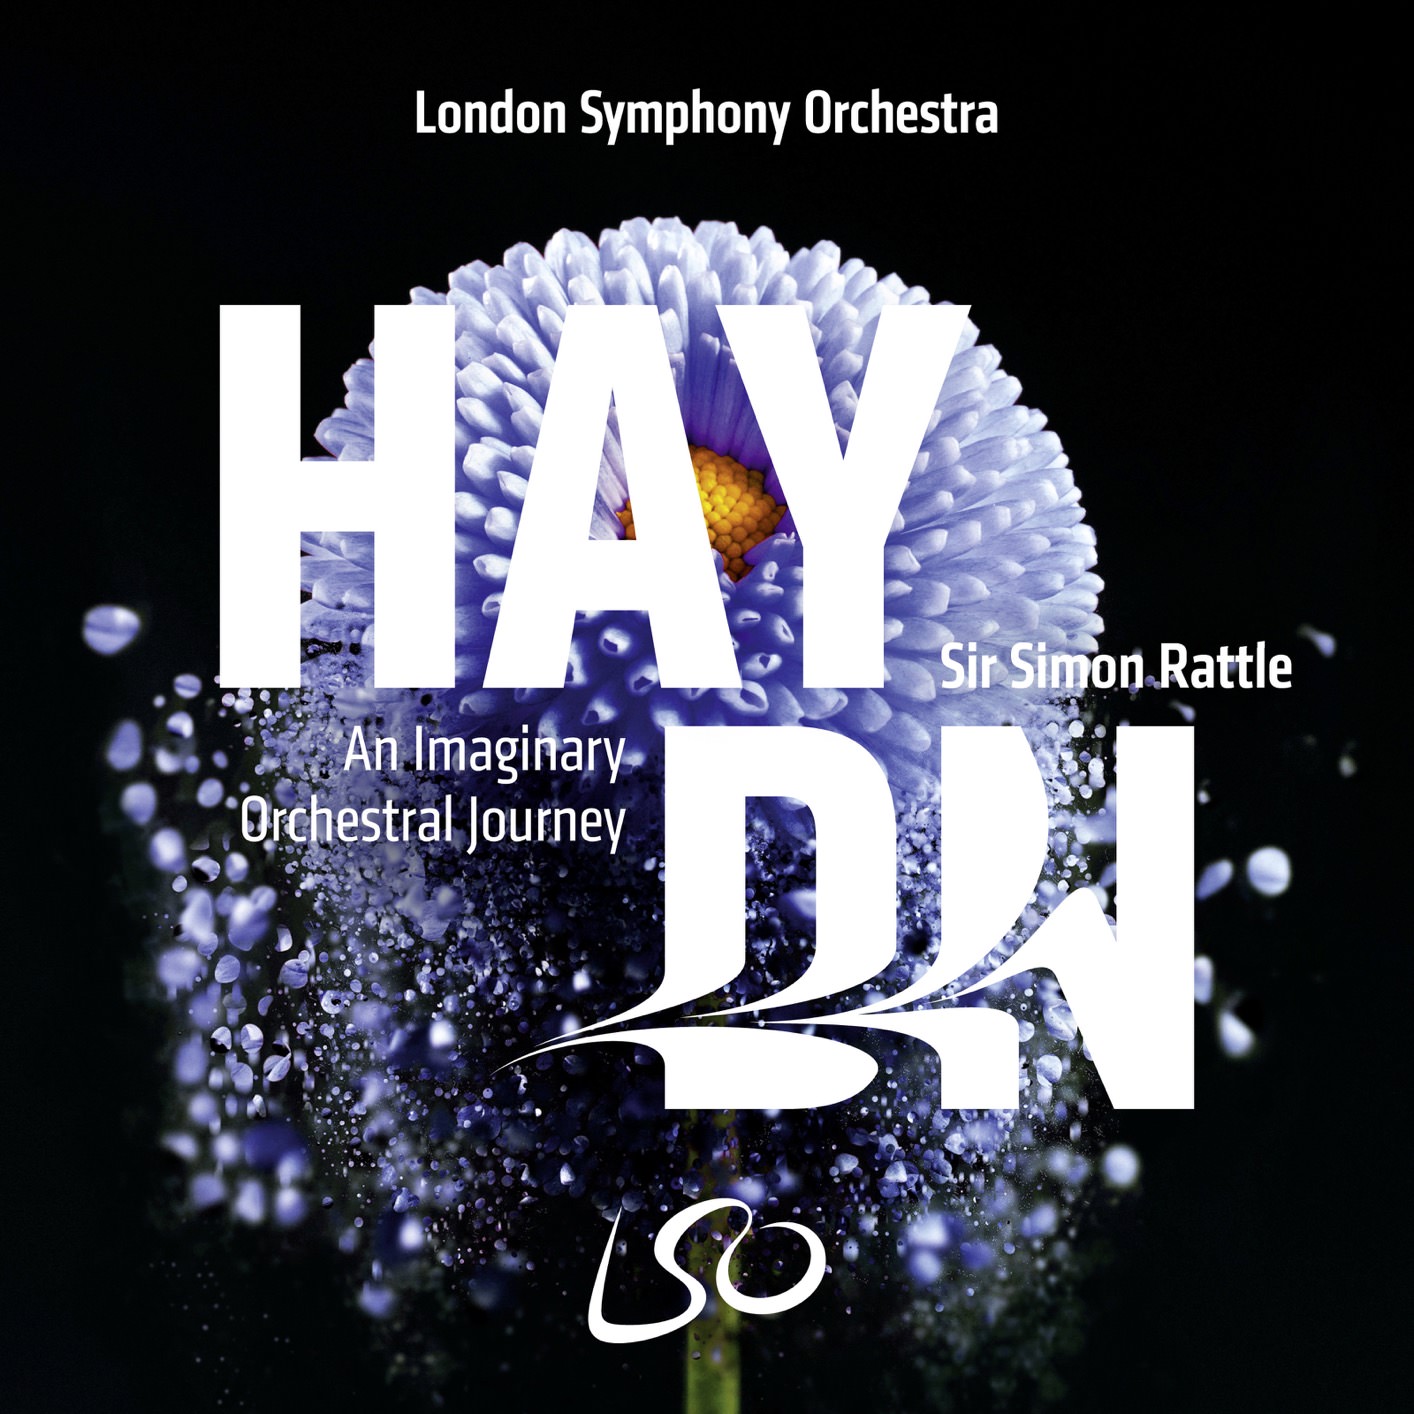 Sir Simon Rattle & London Symphony Orchestra - Haydn: An Imaginary Orchestral Journey (2018) [FLAC 24bit/192kHz]